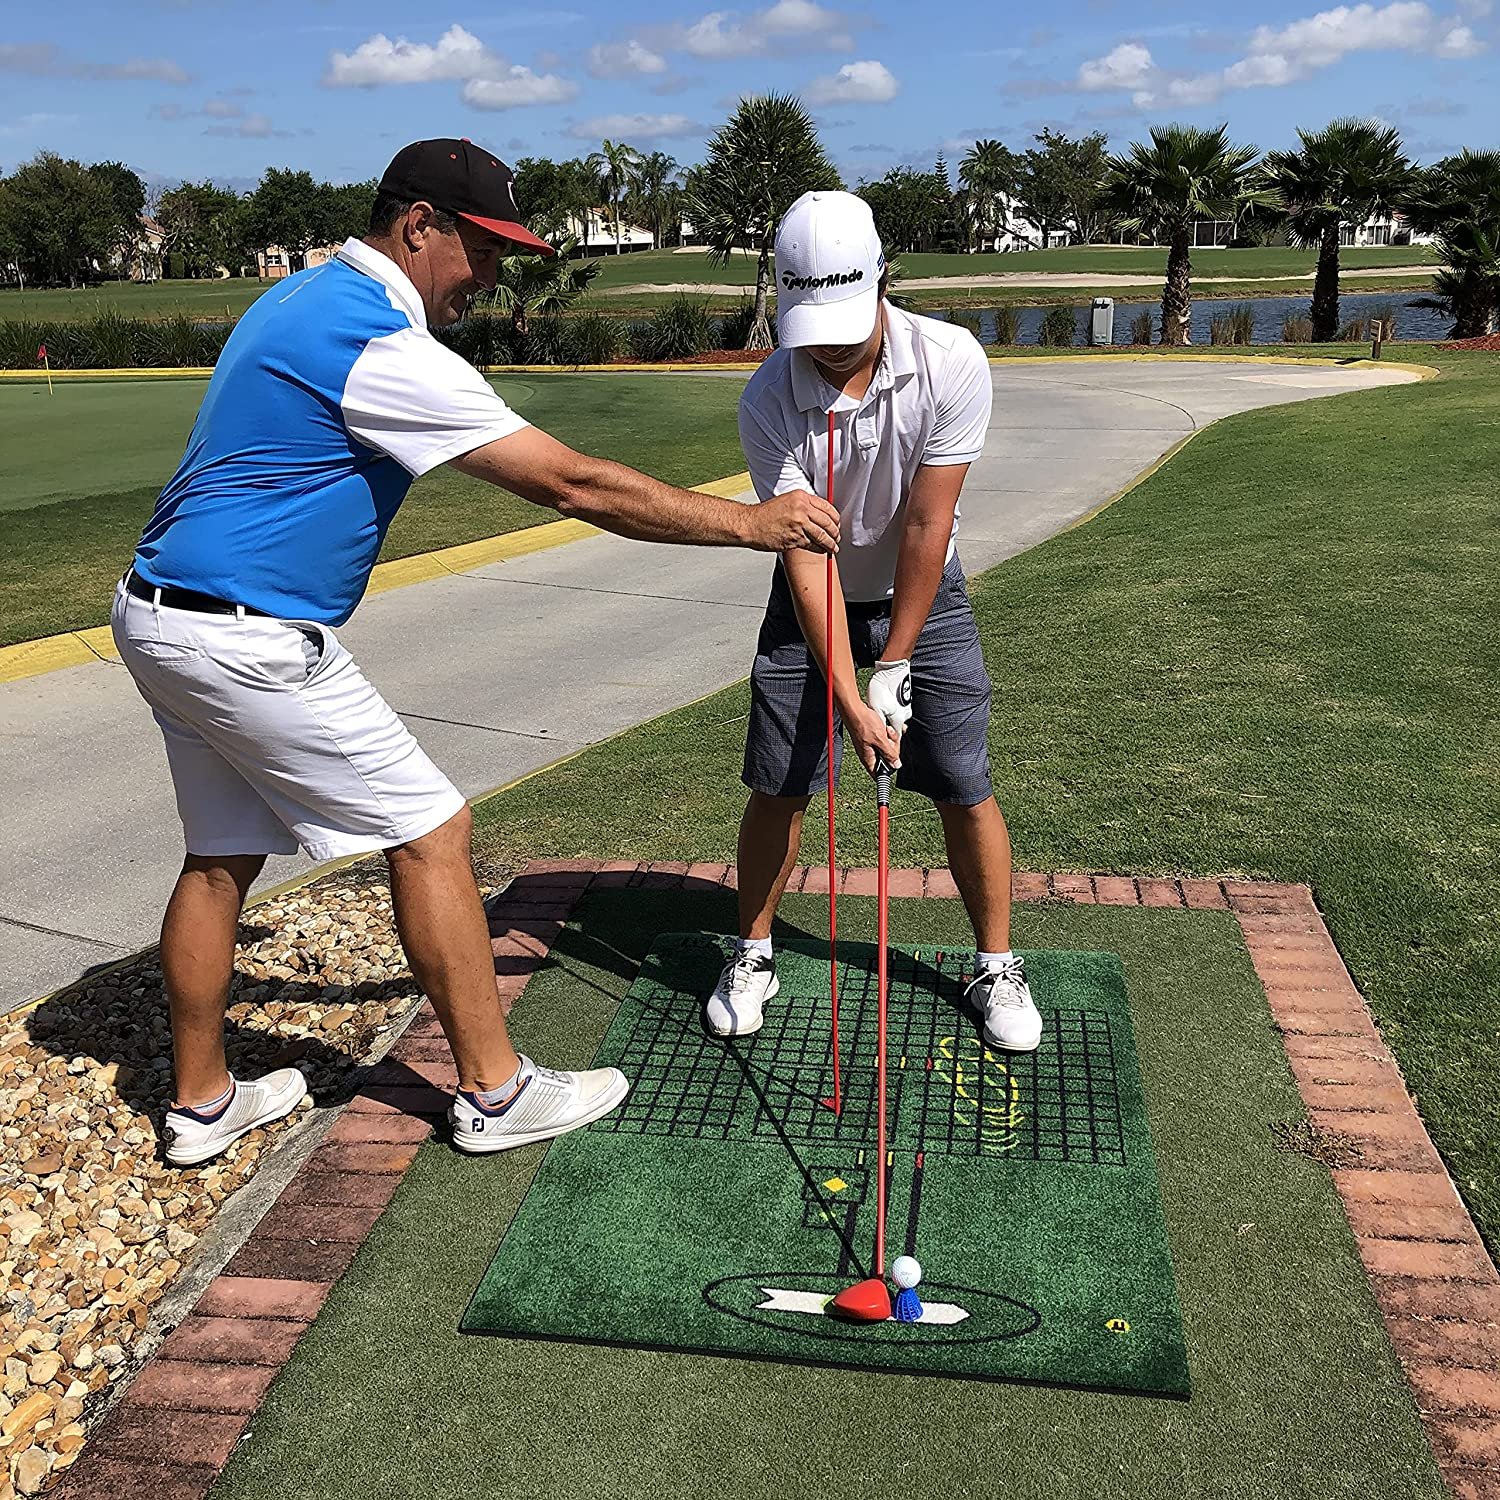 Man showing another person how to practice golf swings on the Golf ForeMat, a golf practice mat.